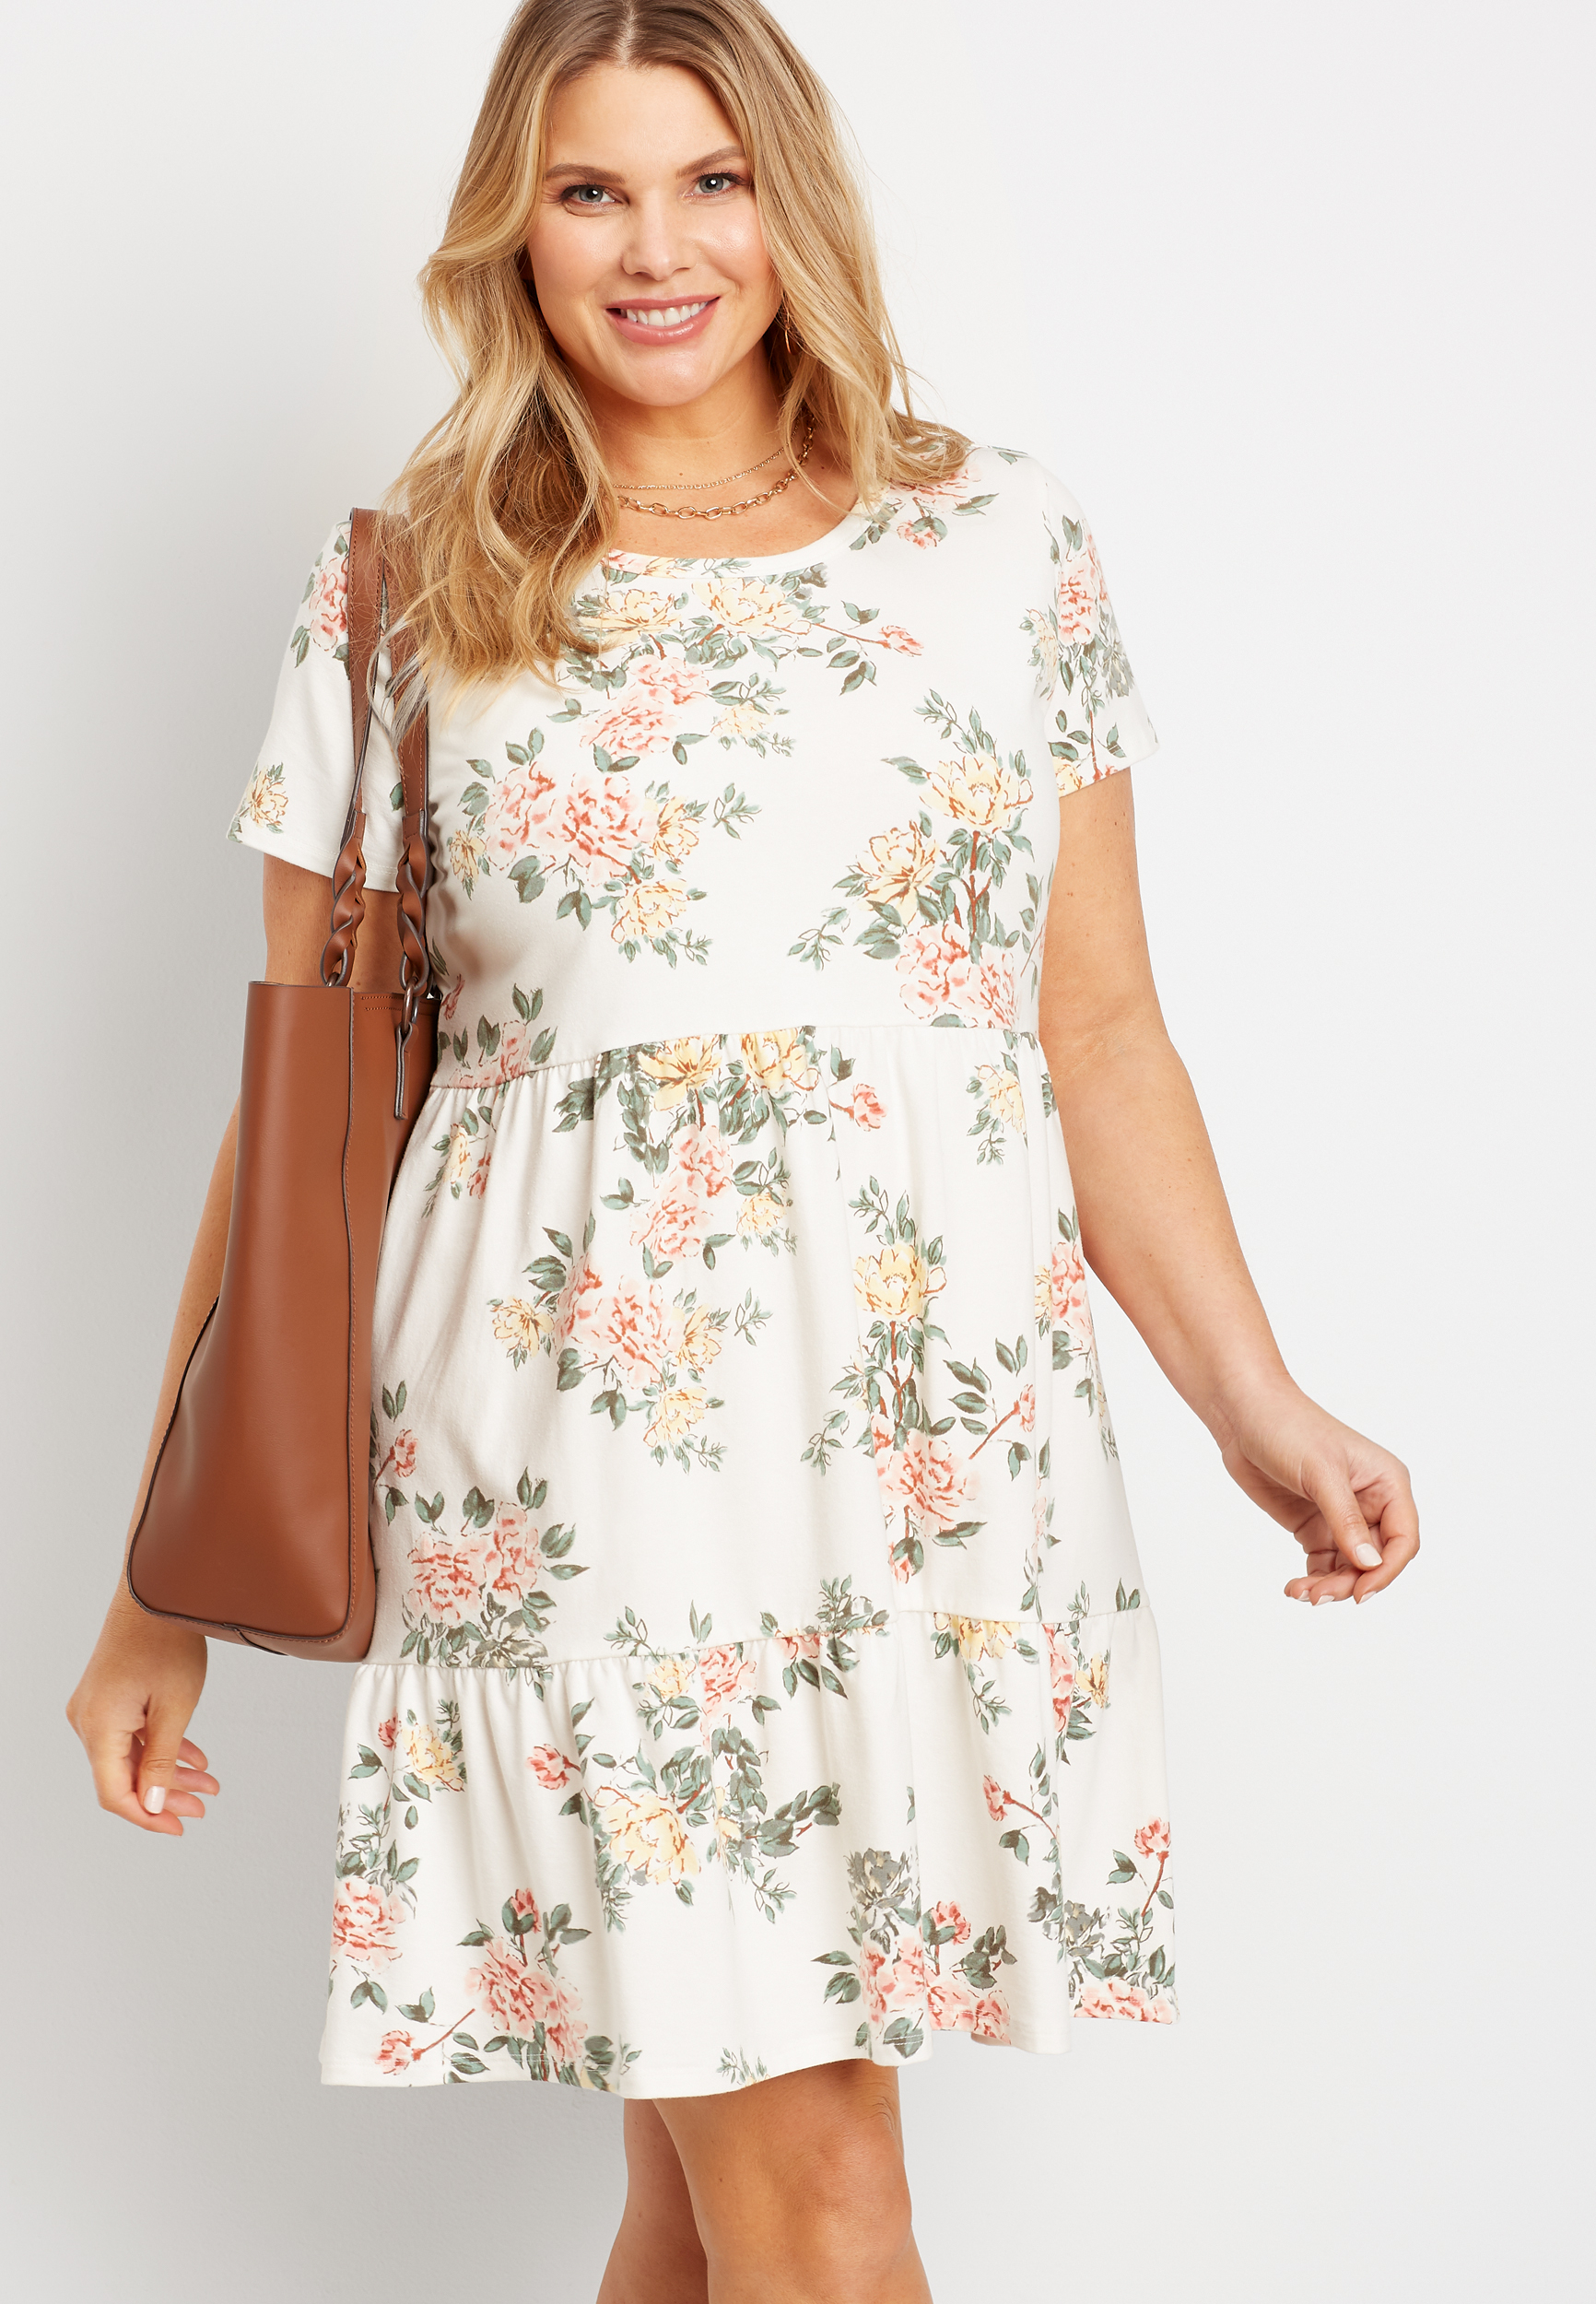 Plus Size 24/7 White Floral Tiered Babydoll Mini Dress | maurices